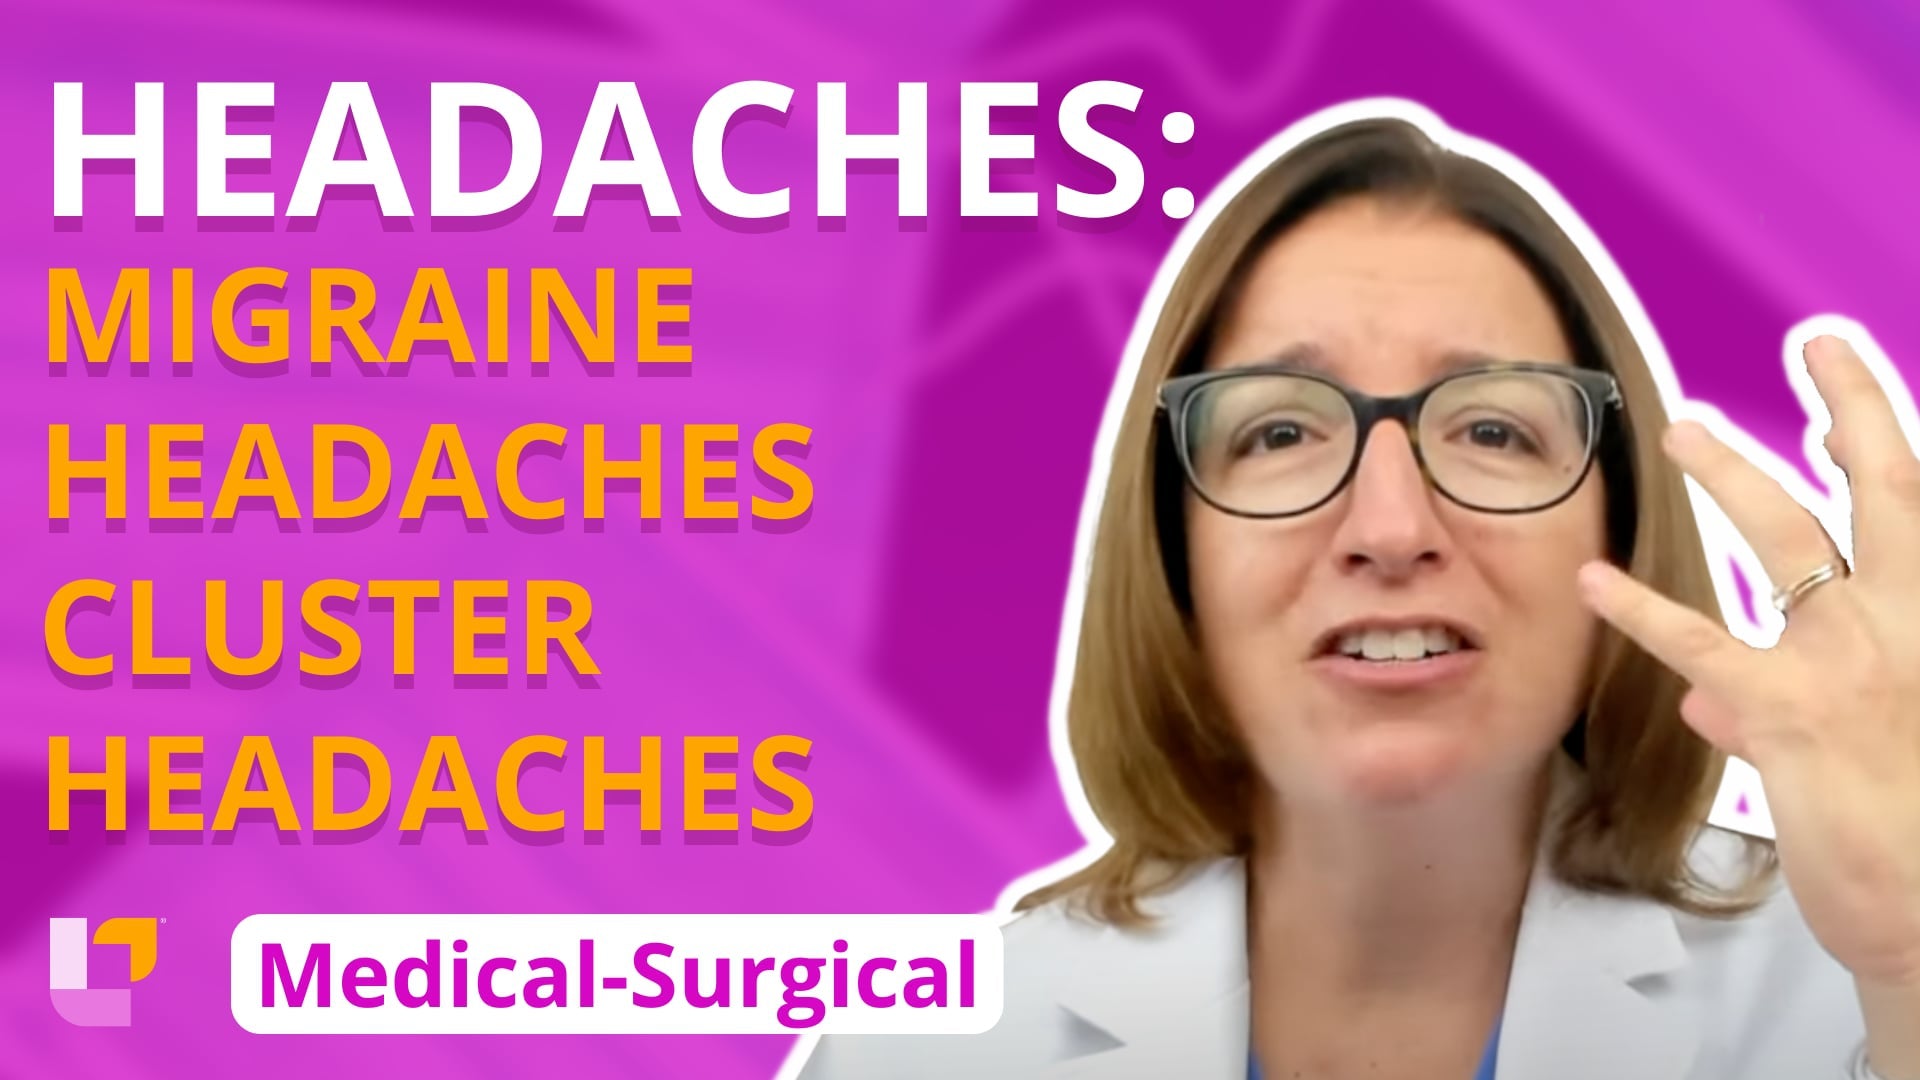 Med-Surg - Nervous System, part 6: Migraine and Cluster Headaches - LevelUpRN